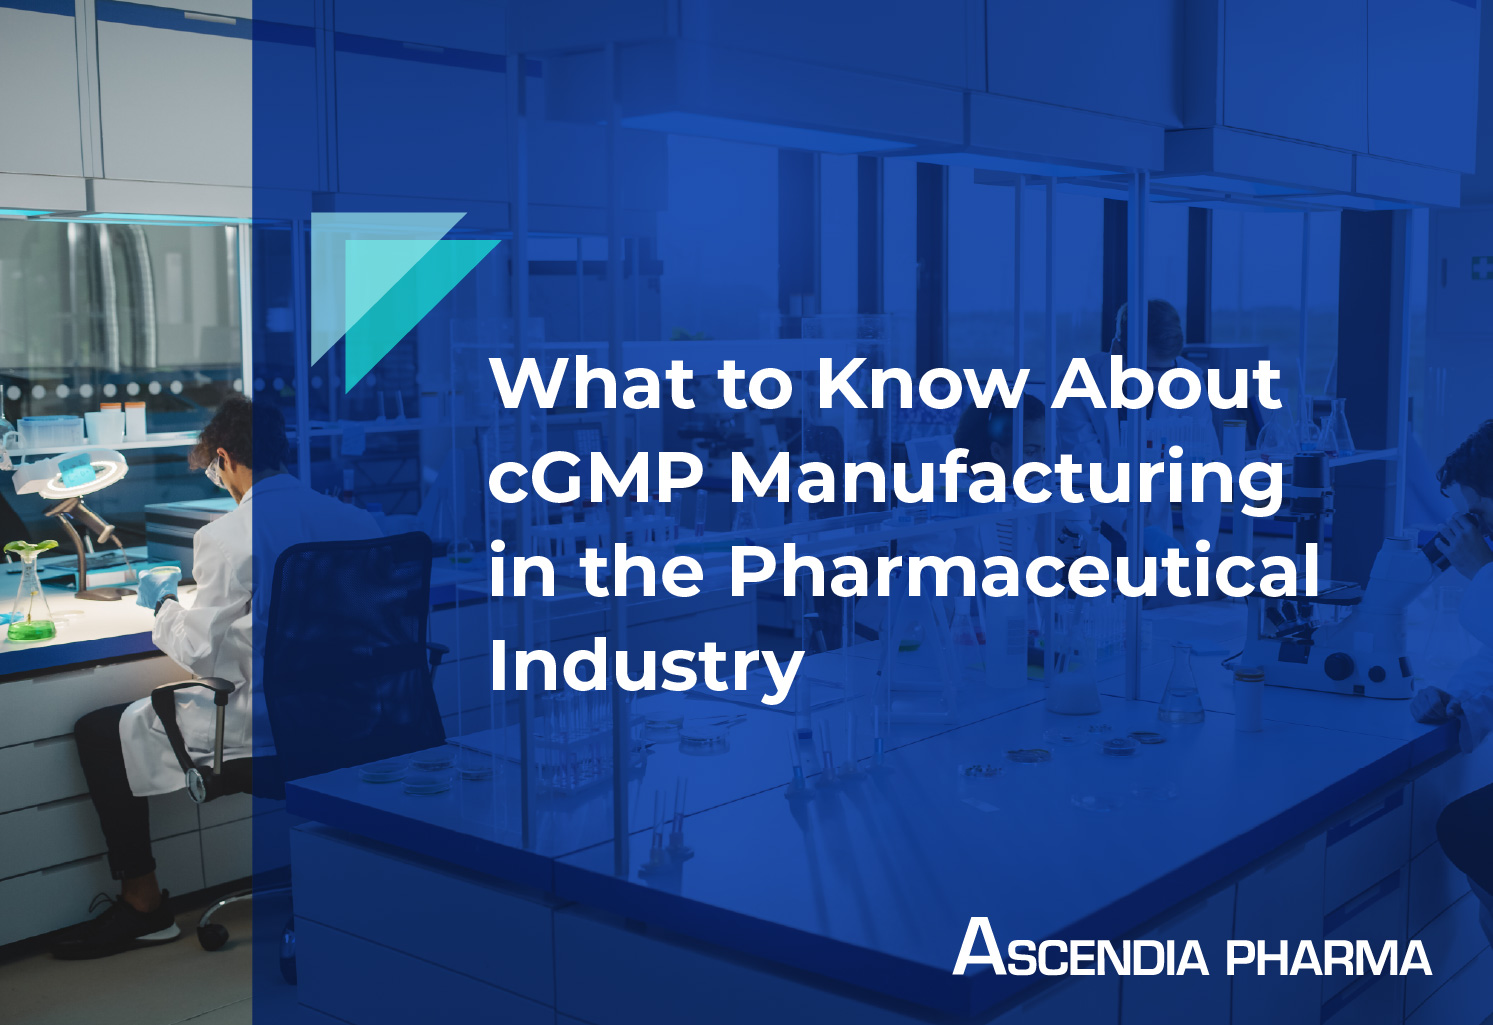 What to Know About cGMP Manufacturing in the Pharmaceutical Industry